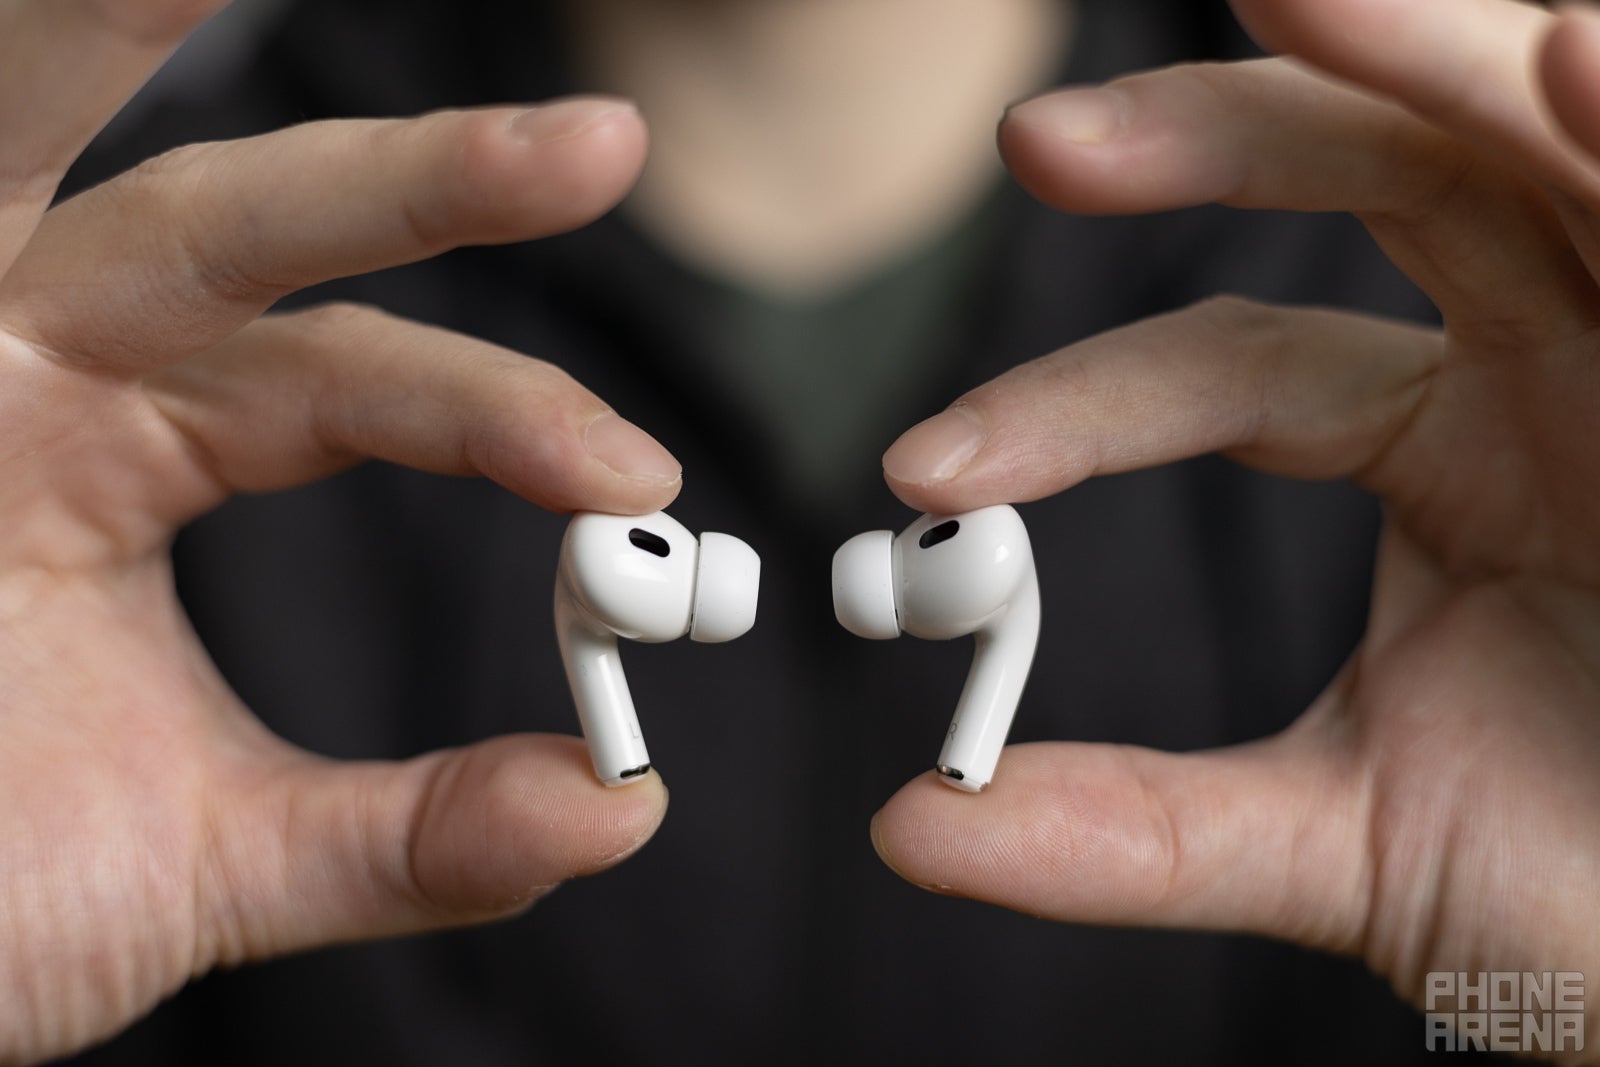 (Image Credit - PhoneArena) AirPods Pro 2 earbuds - AirPods Pro 2 review: Closer to perfection